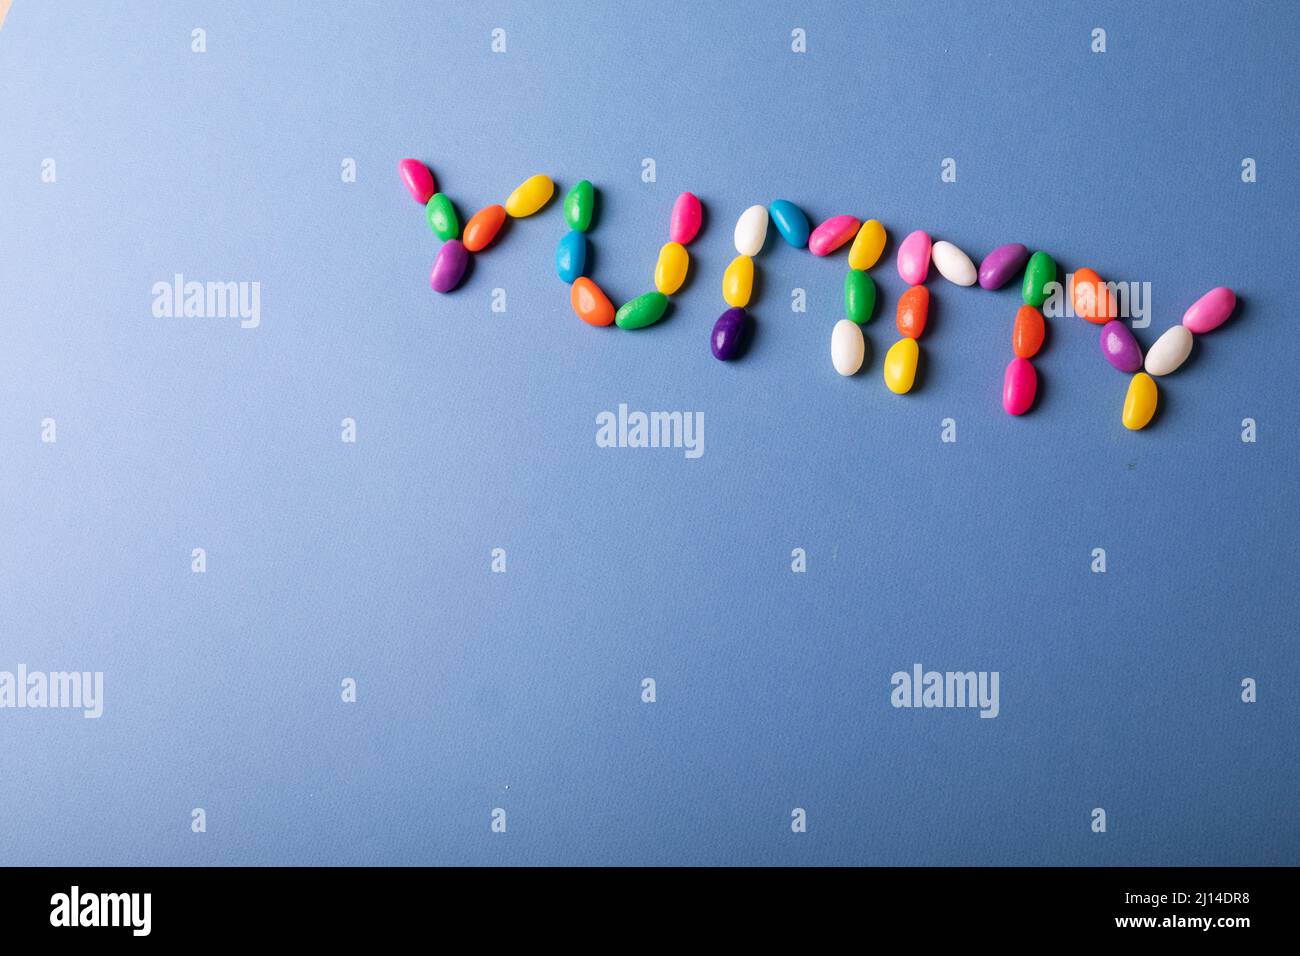 Overhead view of yummy word arranged from colorful candies on blue background over copy space Stock Photo